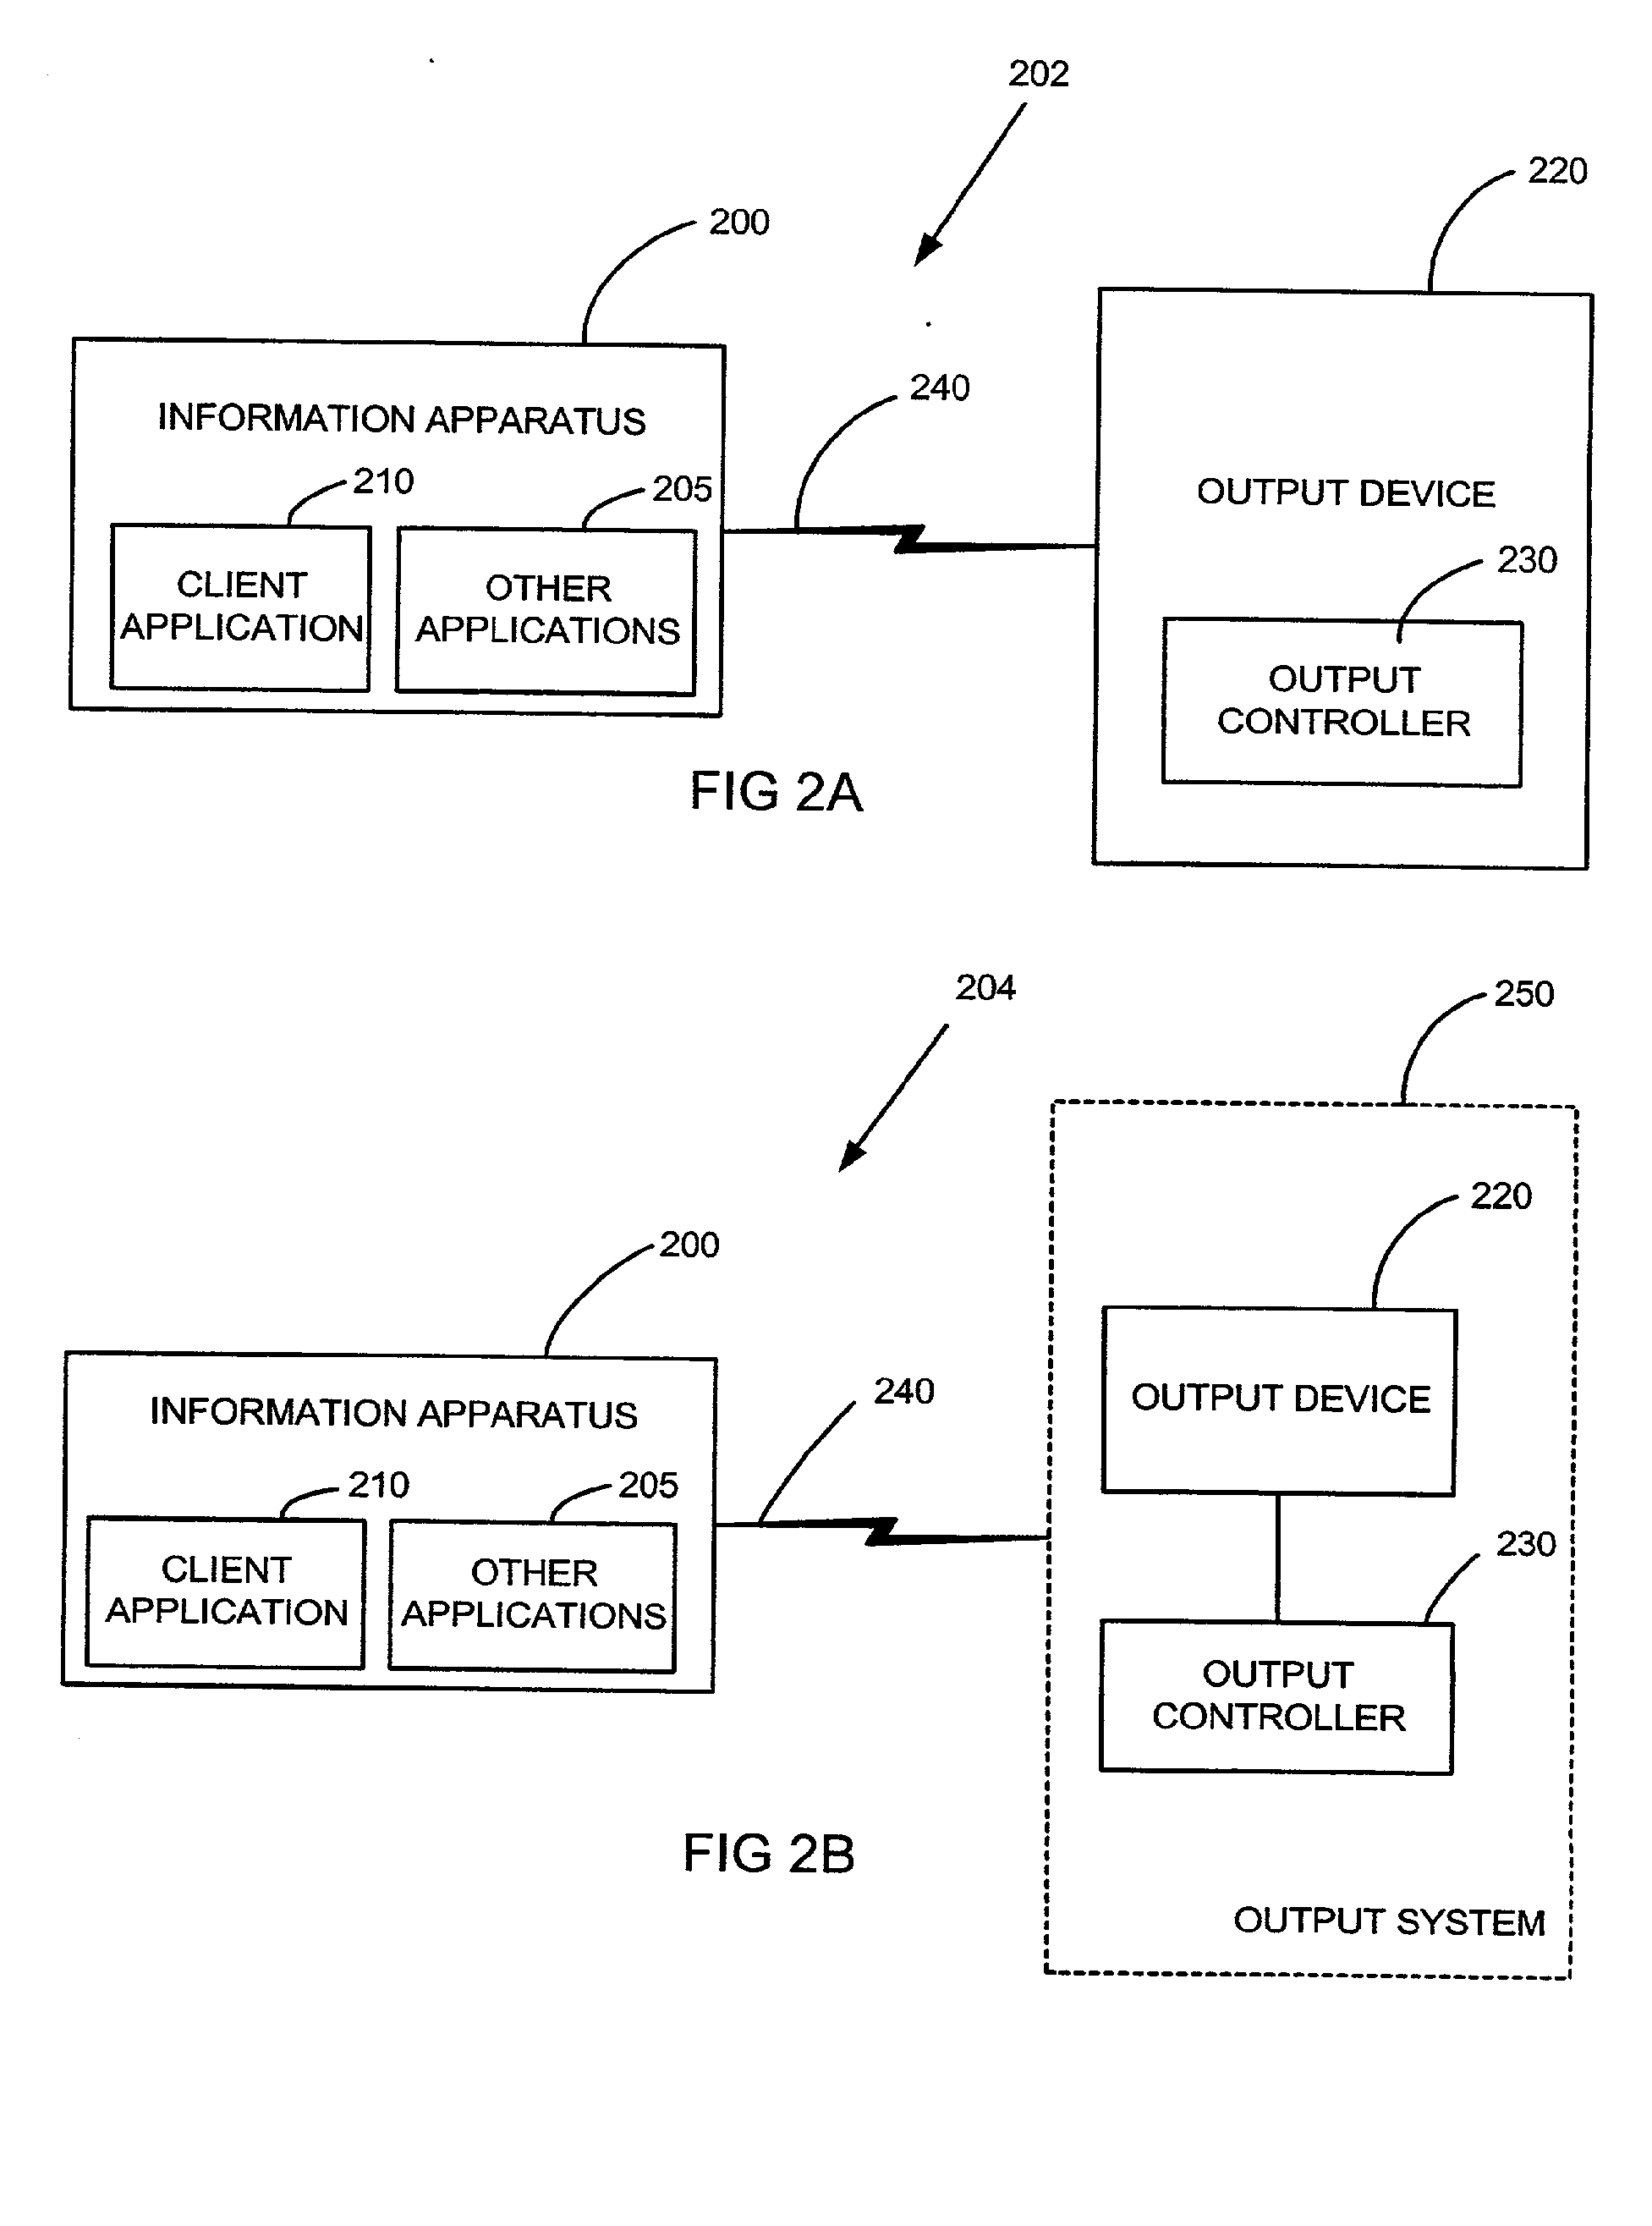 Output controller systems, method, software, and device for wireless data output